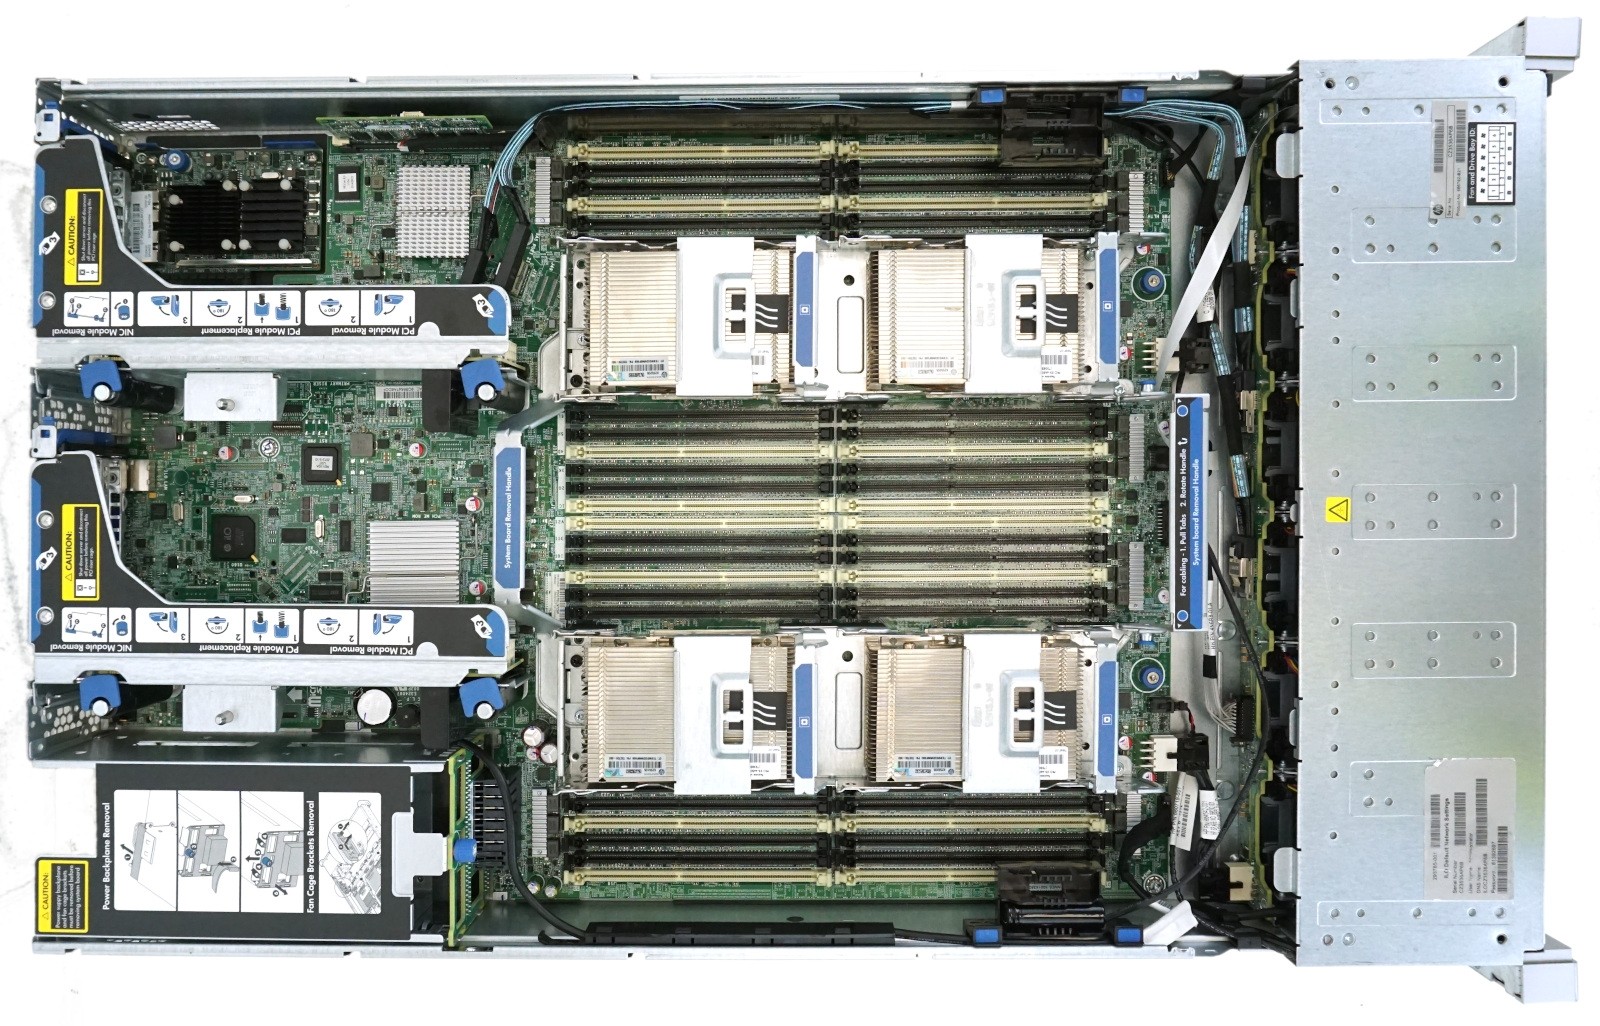 If you command performance, reliability and availability the 4 socket HP Pr...